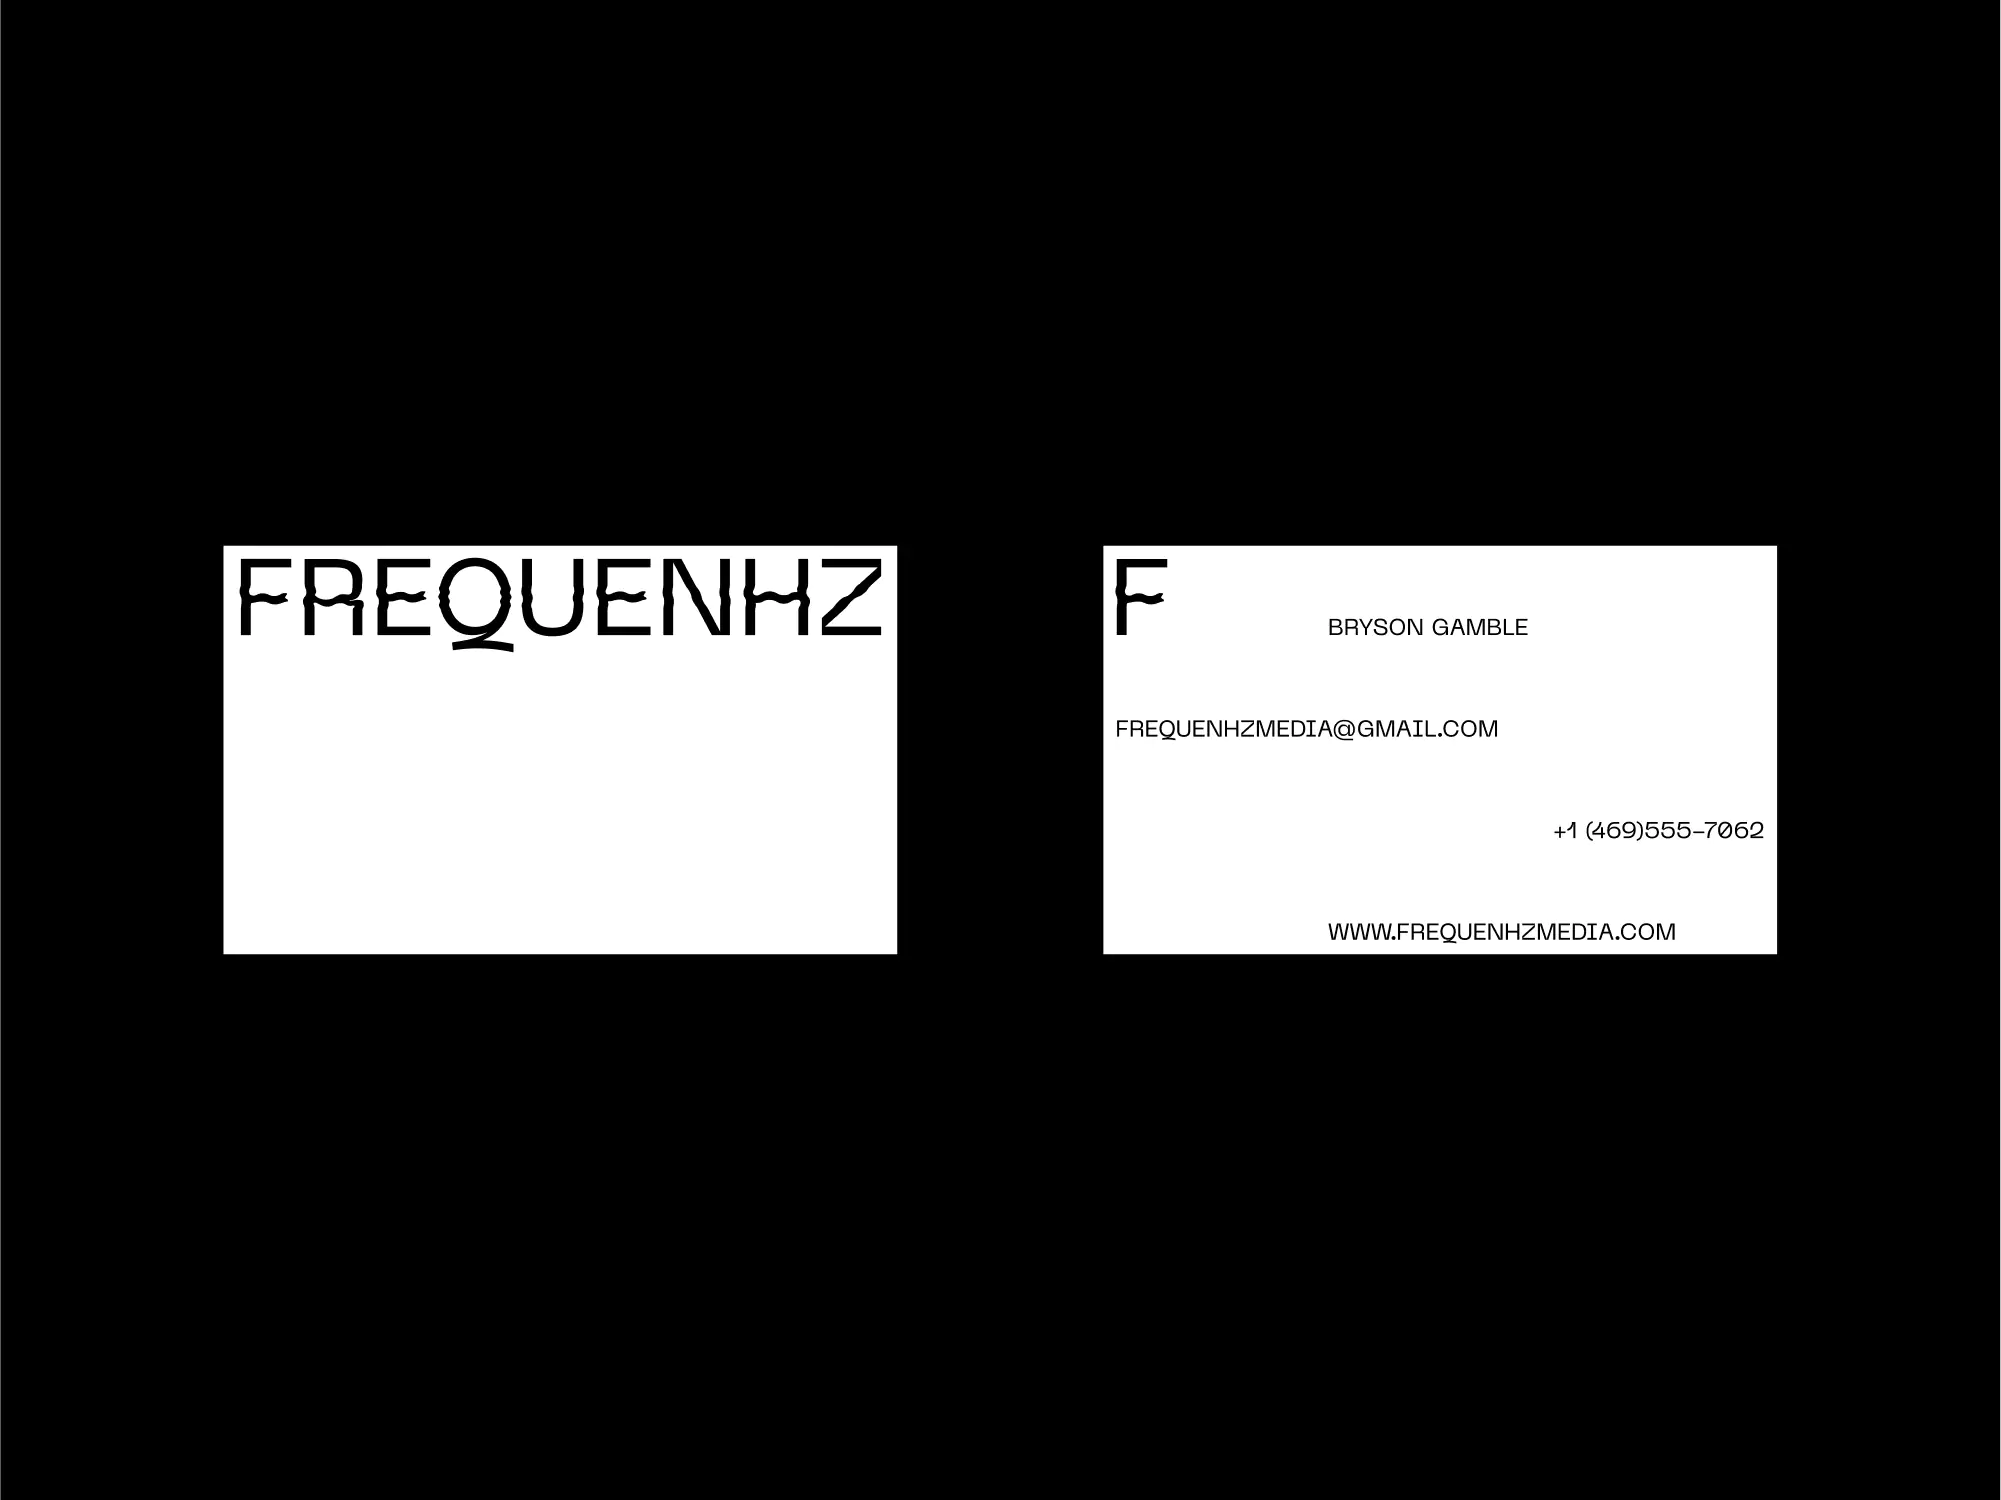 Visual Identity for Frequenhz - Business Card Design